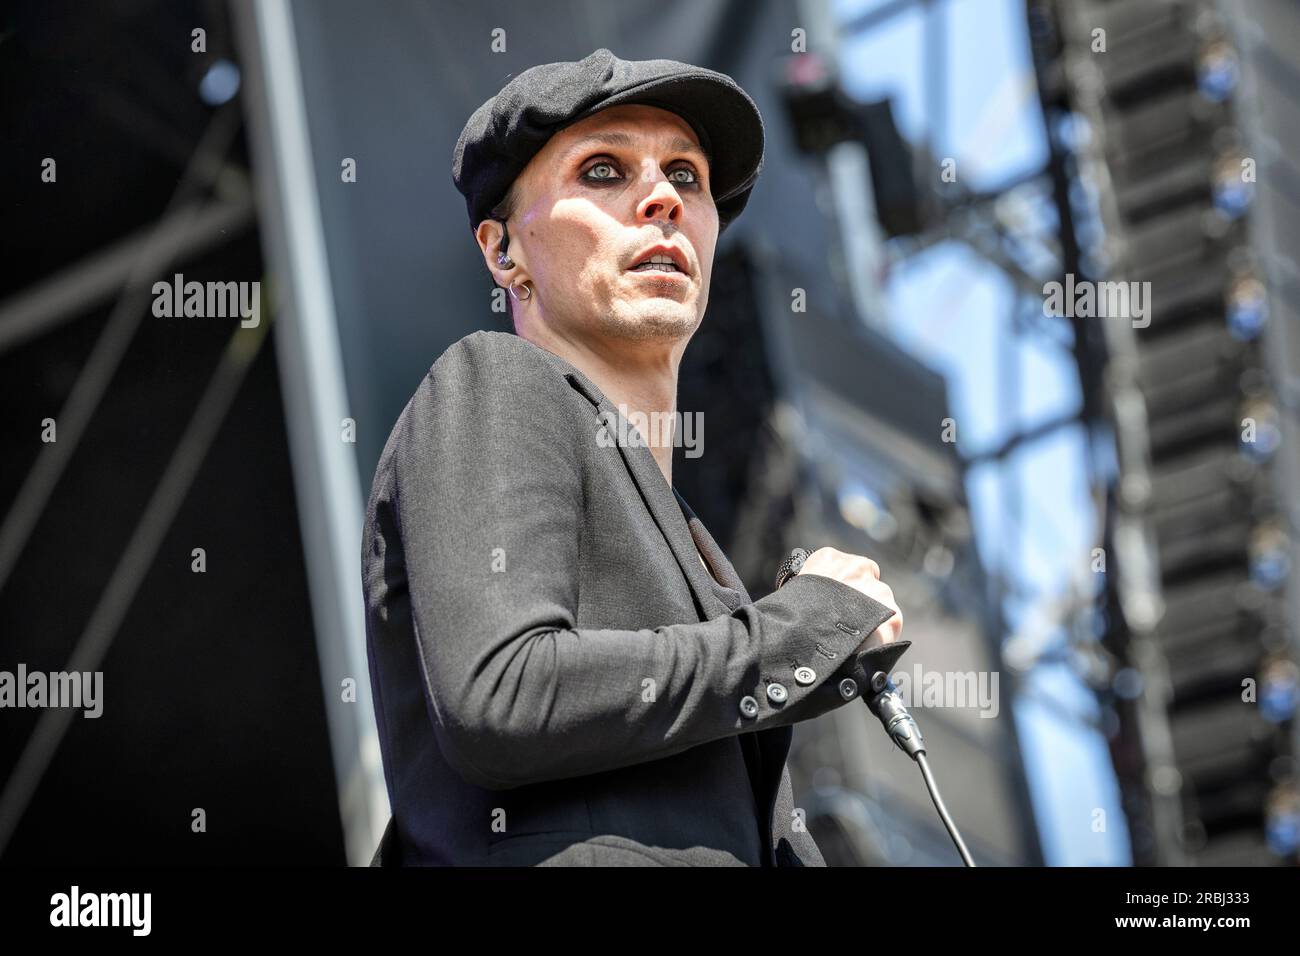 Oslo, Norway. 23rd, June 2023. The Finnish act VV performs a live concert during the Norwegian music festival Tons of Rock 2023 in Oslo. (Photo credit: Gonzales Photo - Terje Dokken). Stock Photo